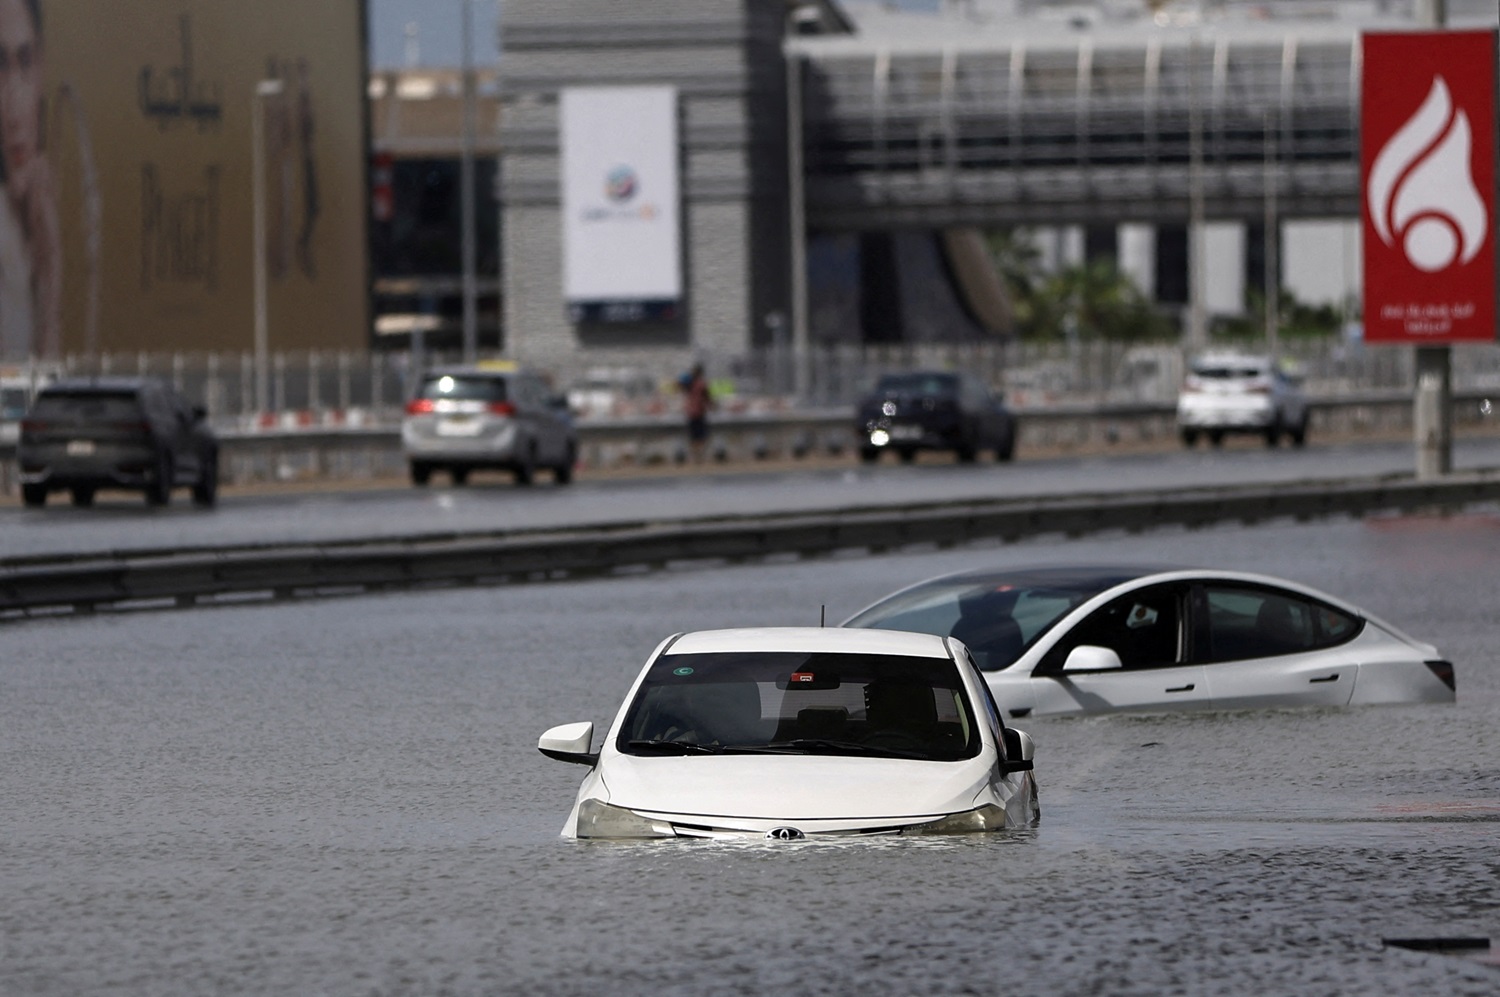 Cars sit stranded in floodwaters caused by heavy rains in Dubai. Photo: Reuters